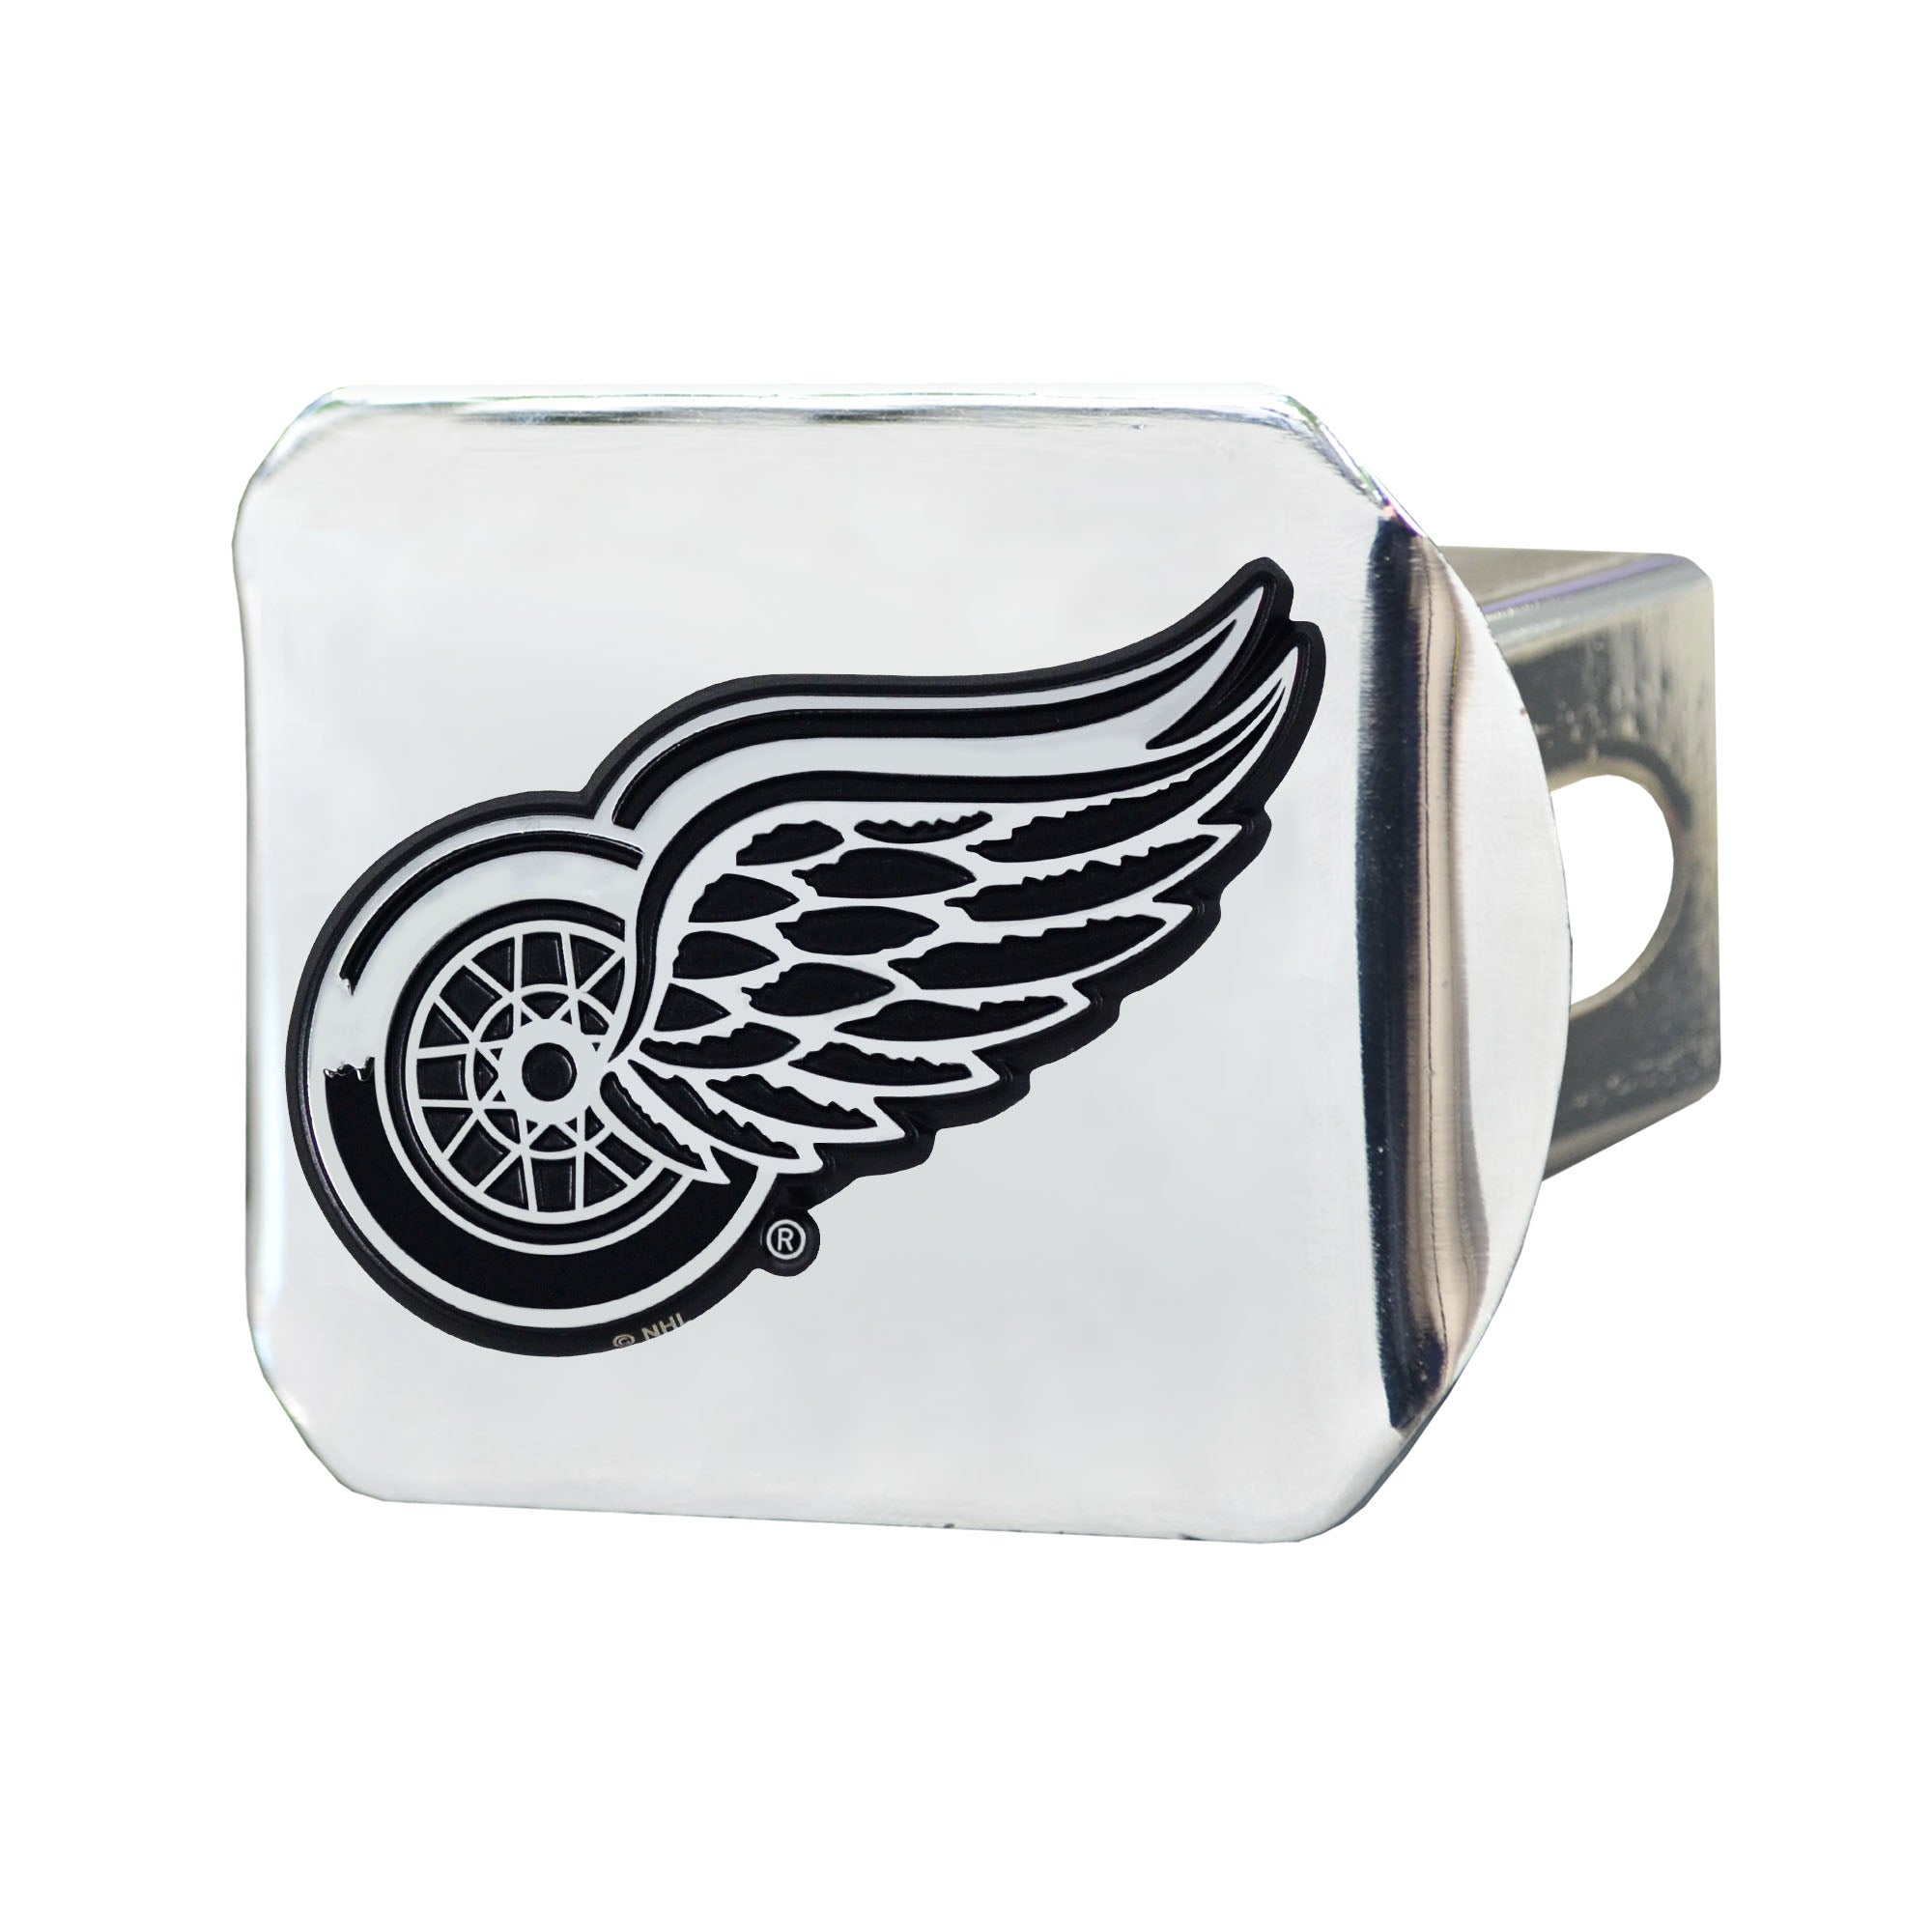 NHL - Detroit Red Wings Hitch Cover - Chrome